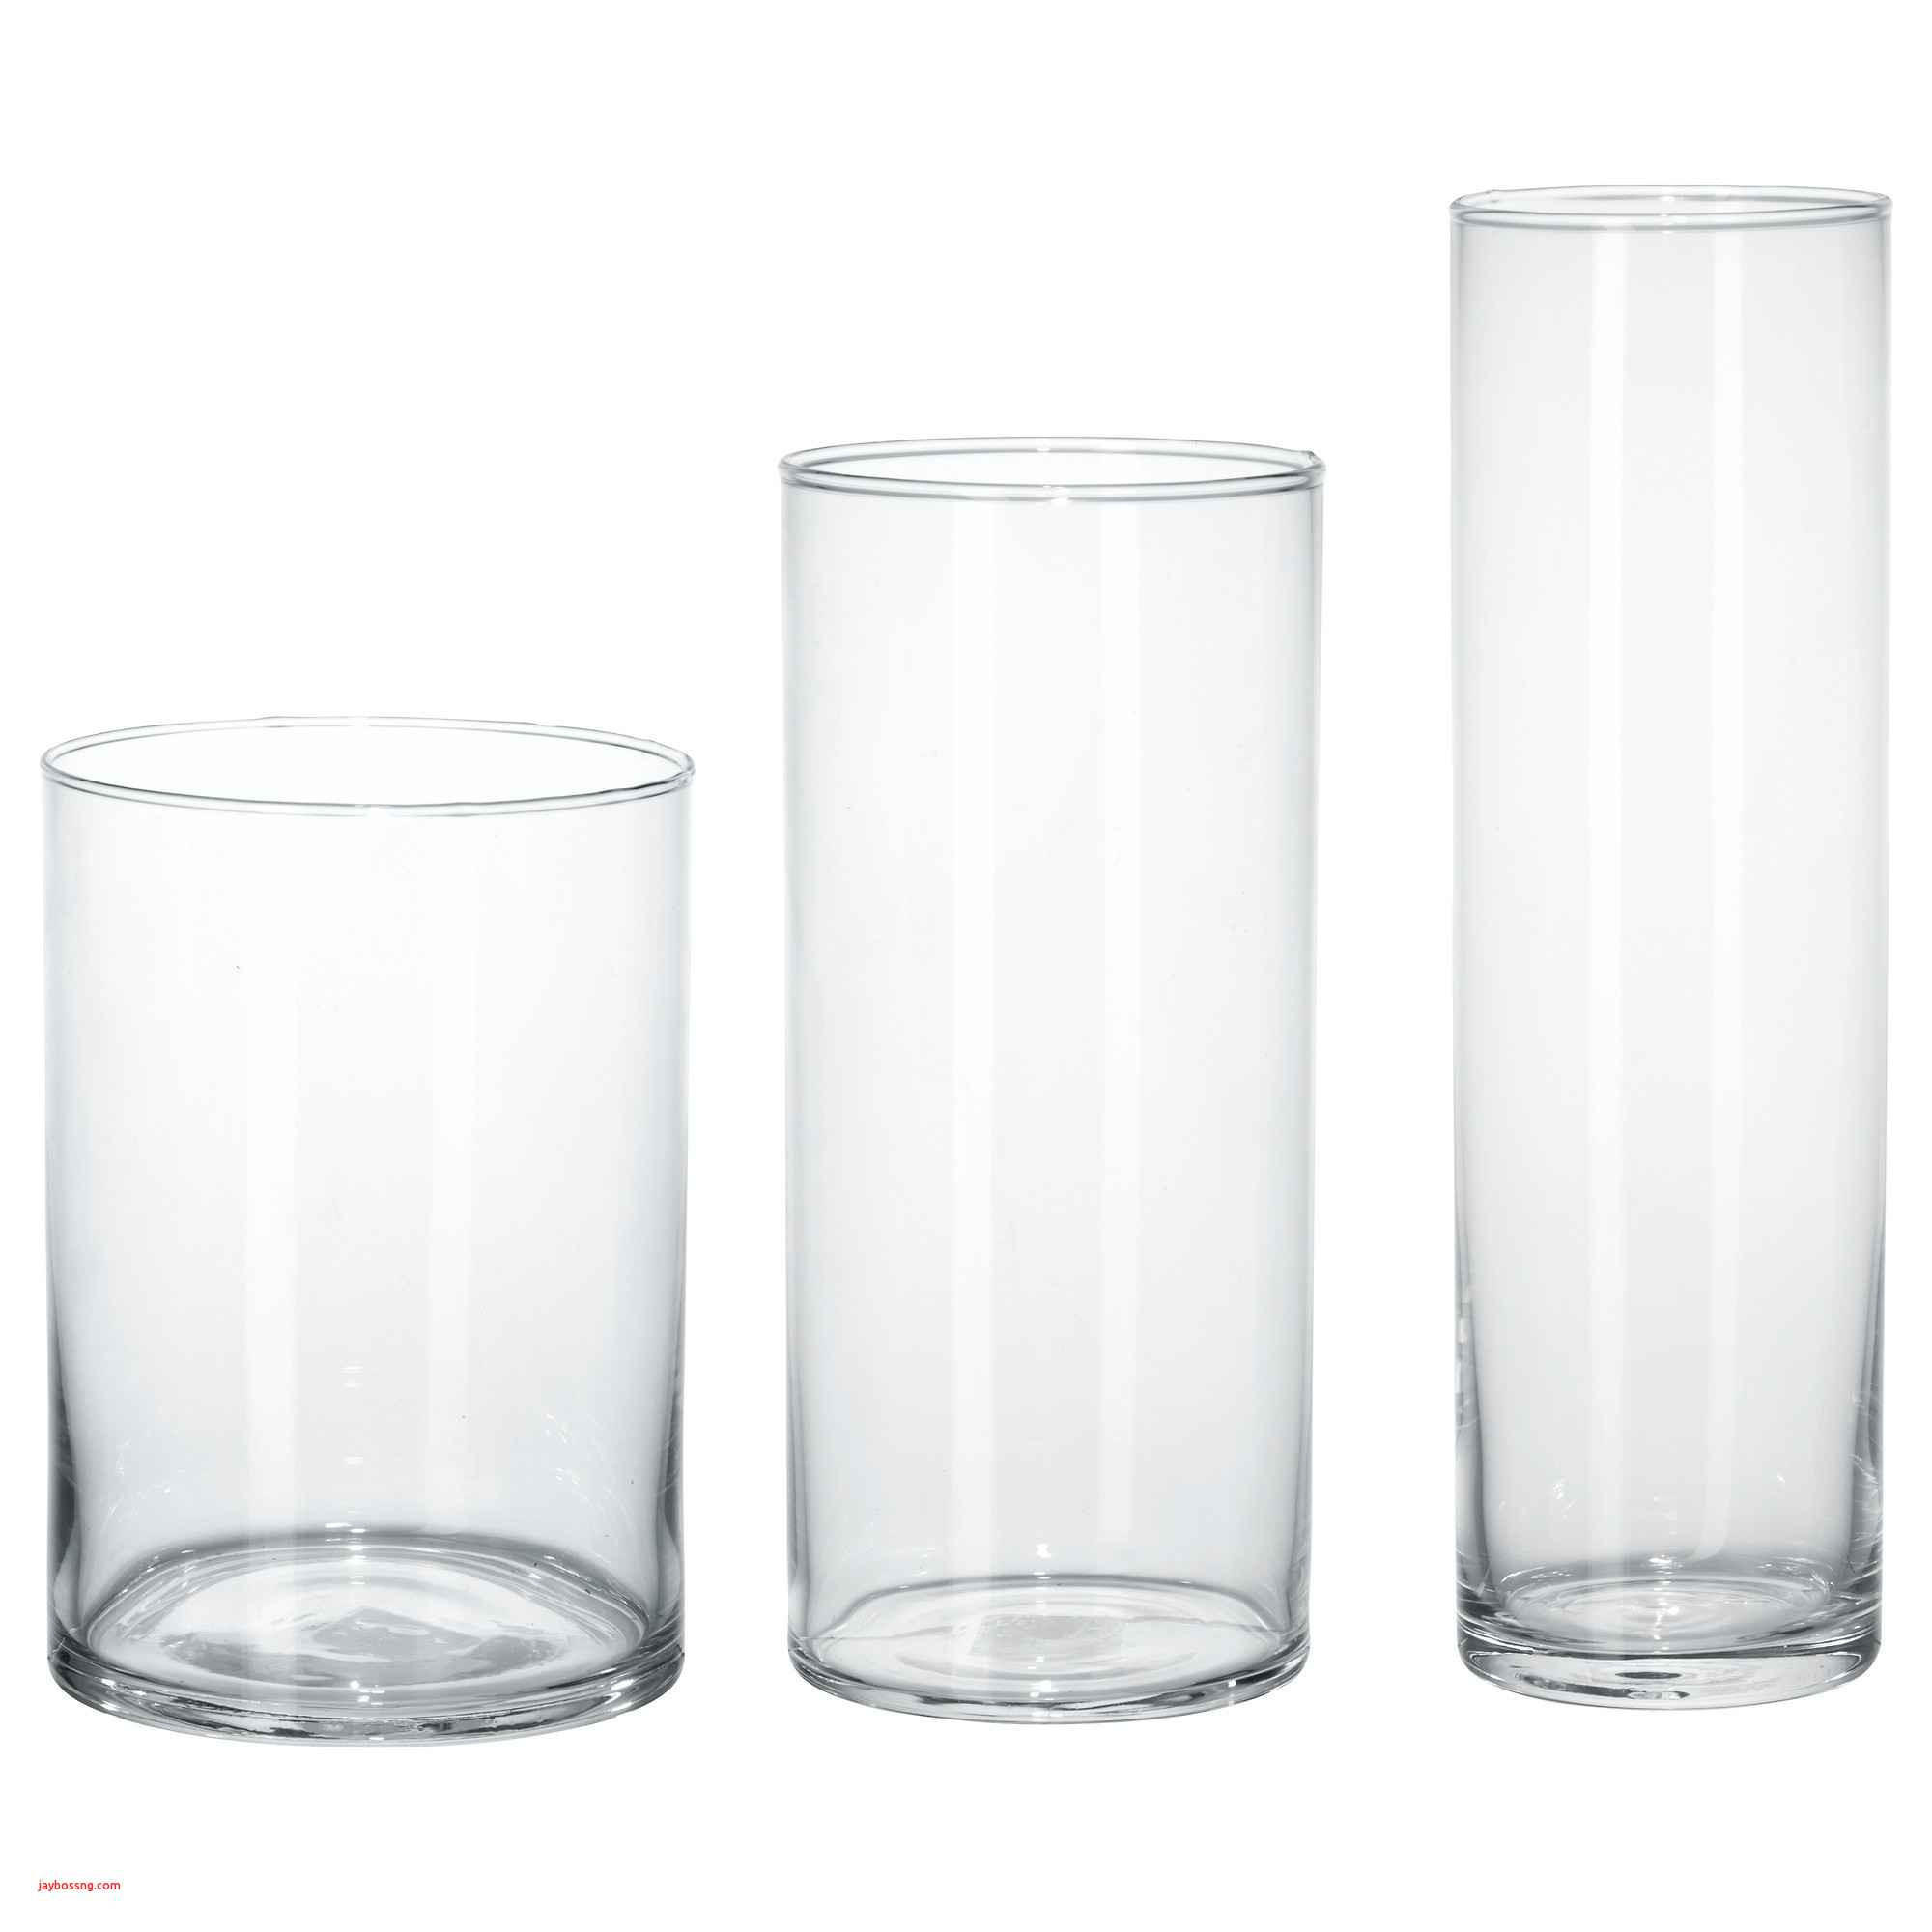 10 attractive Ikea Rectangular Glass Vase 2024 free download ikea rectangular glass vase of 83 great white ikea desk chart photograph desksify com in white ikea desk photos of ikea white vase vases artificial plants collection of 83 great white